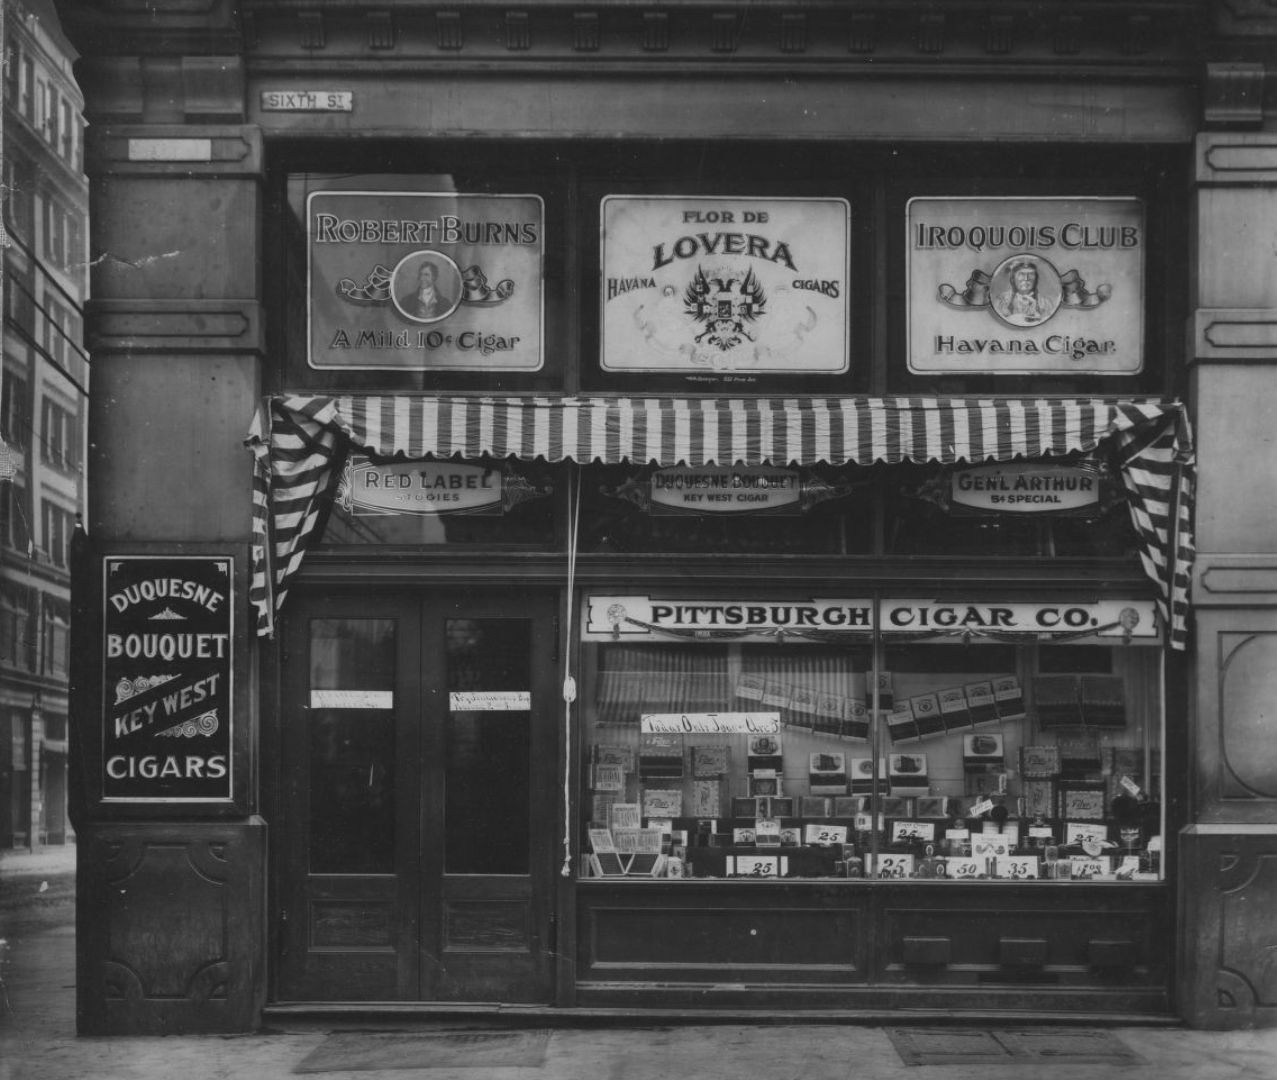 Archival image of a cigar and tobacco shop with various signage elements and a window display visible.